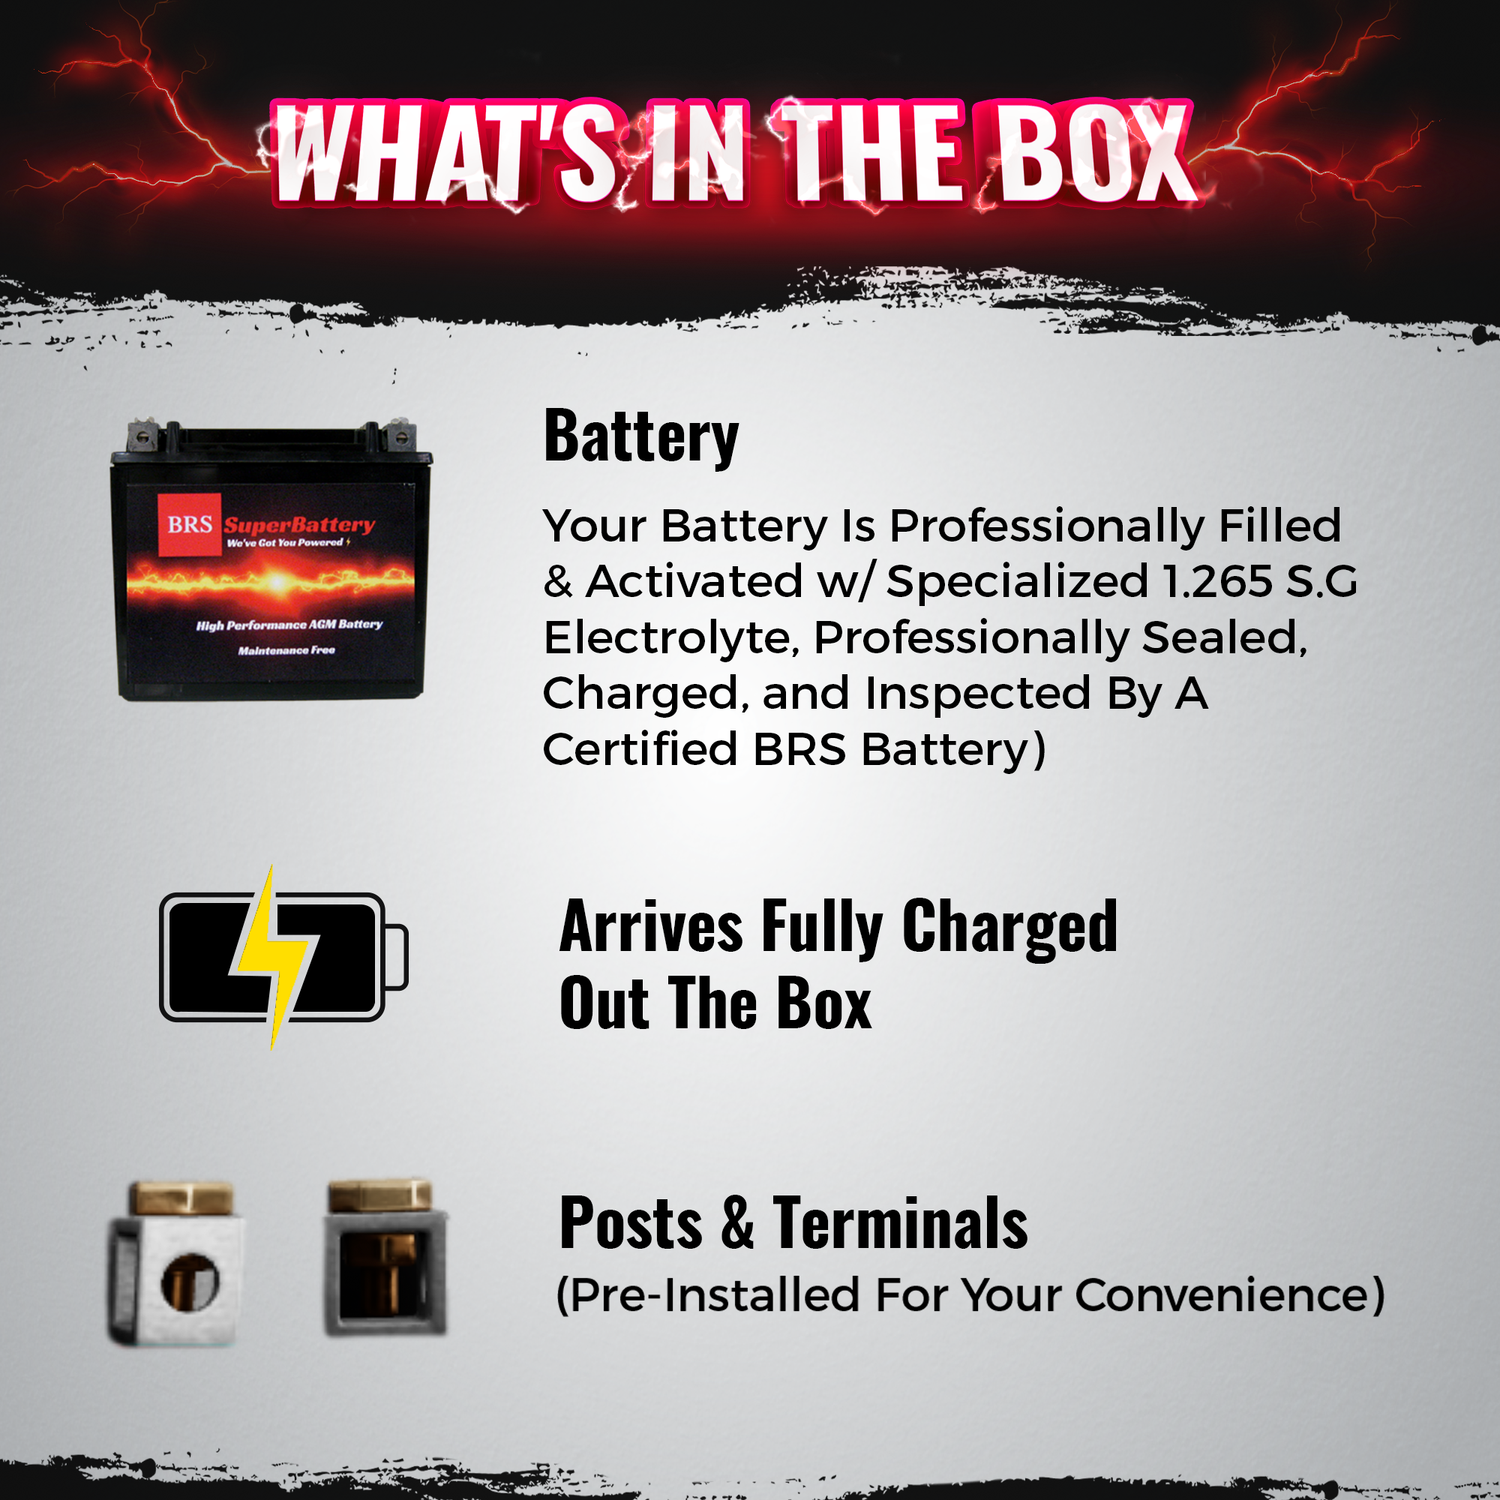 BRS14-BS 12v High Performance Sealed AGM PowerSport 10 Year Battery - BRS Super Battery